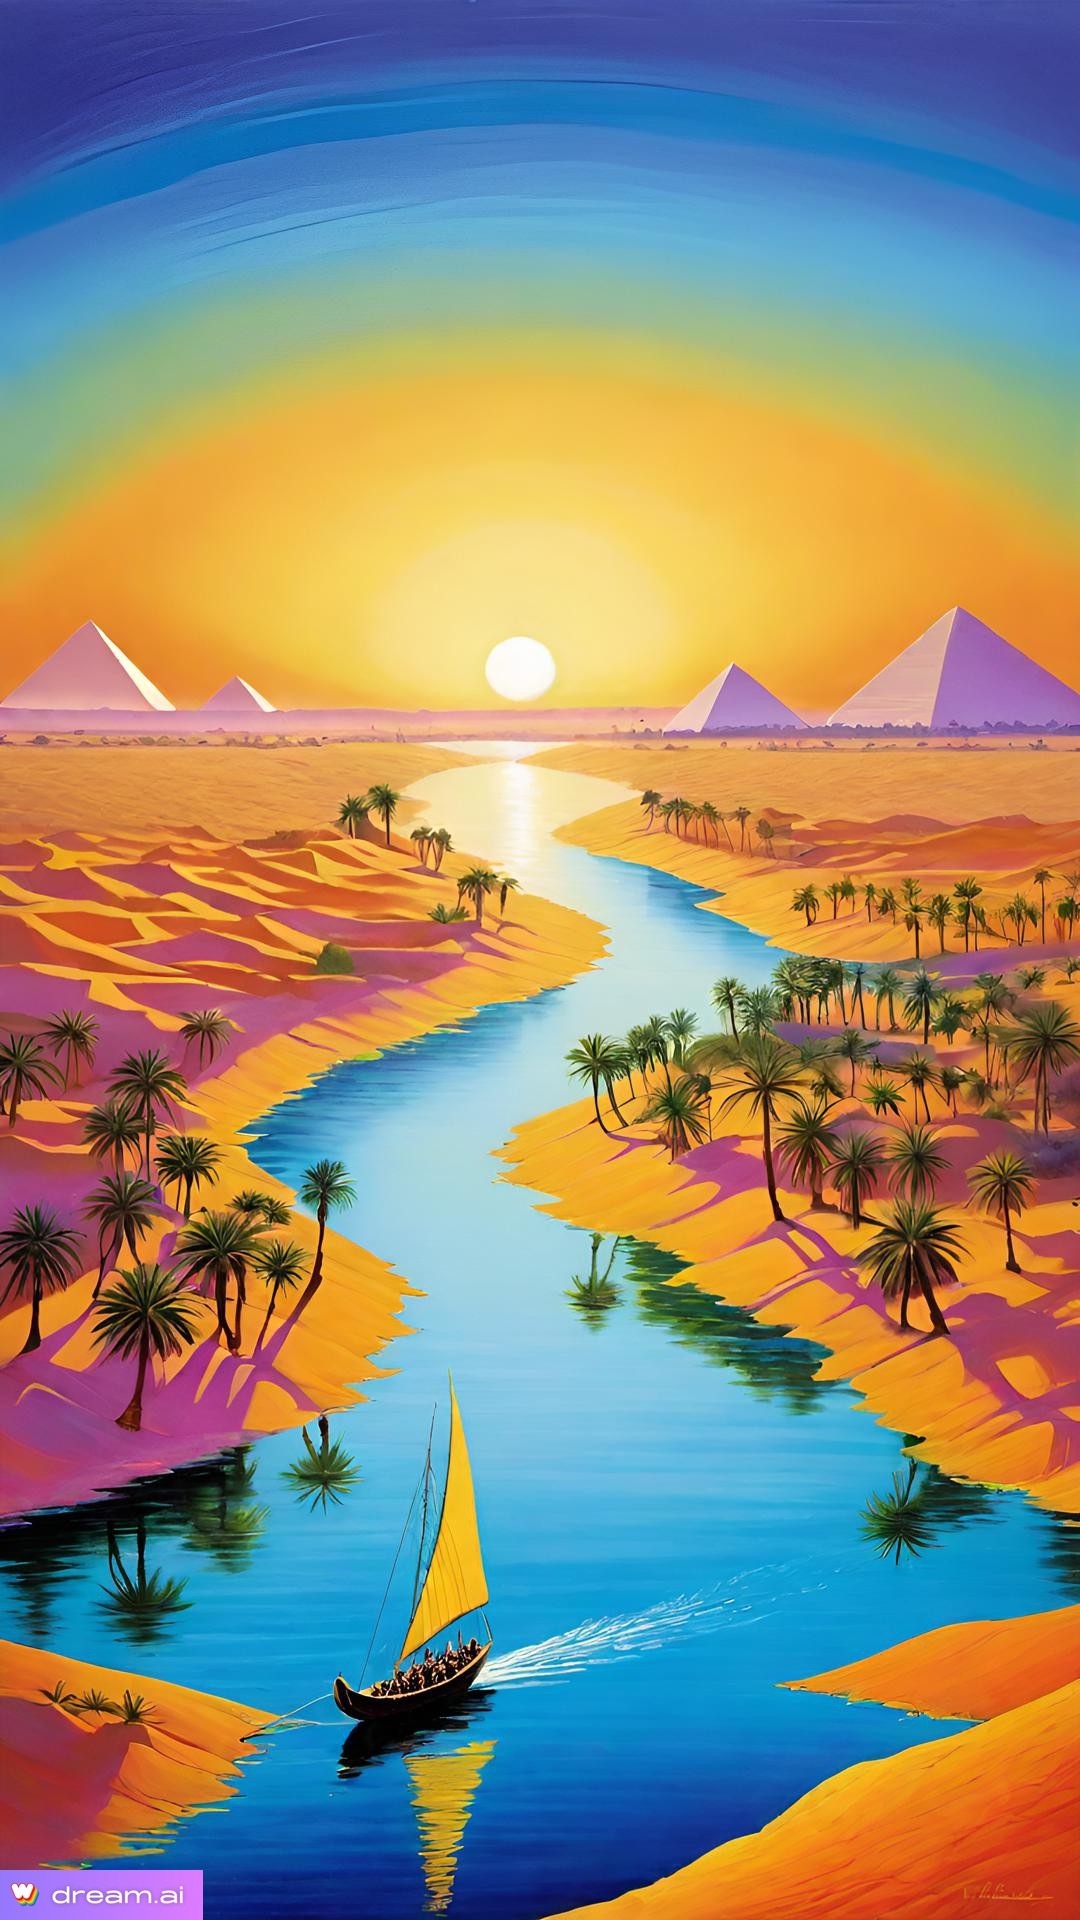 a river running through a desert with palm trees and pyramids